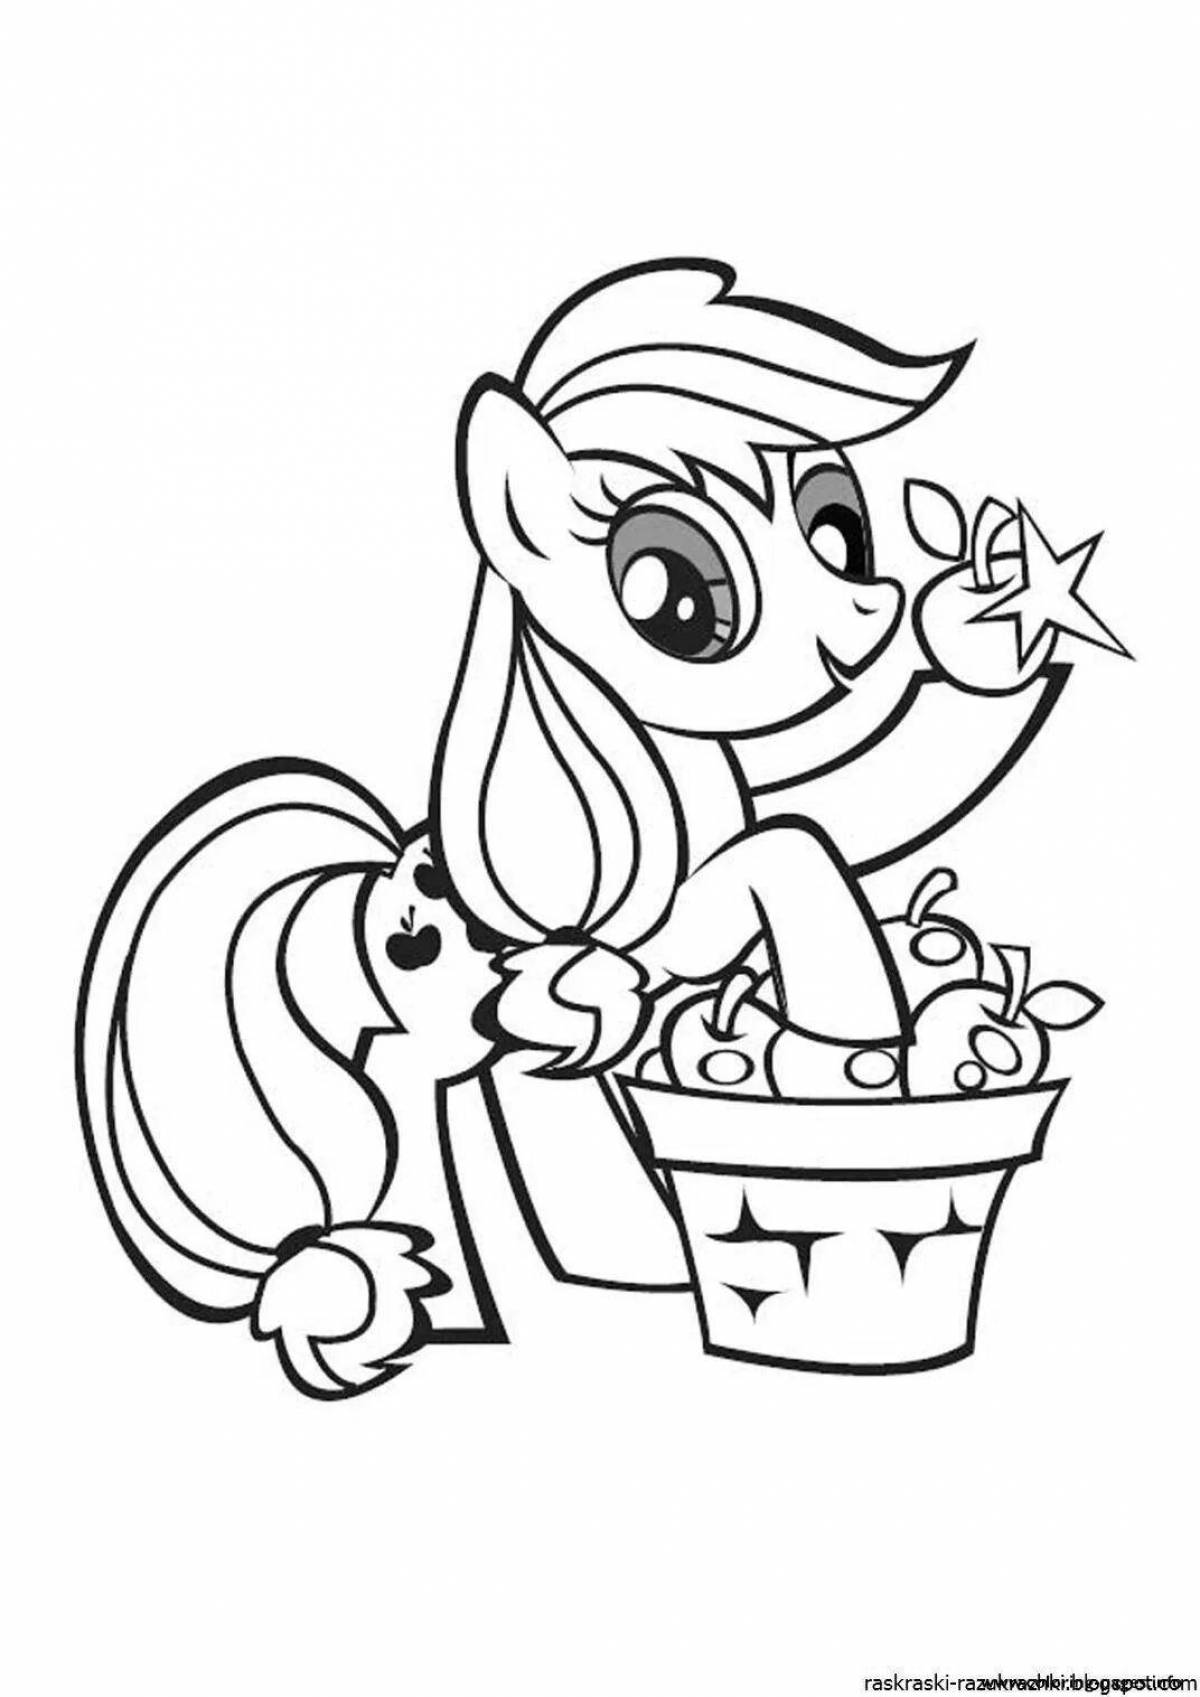 Dazzling coloring page 4 for girls